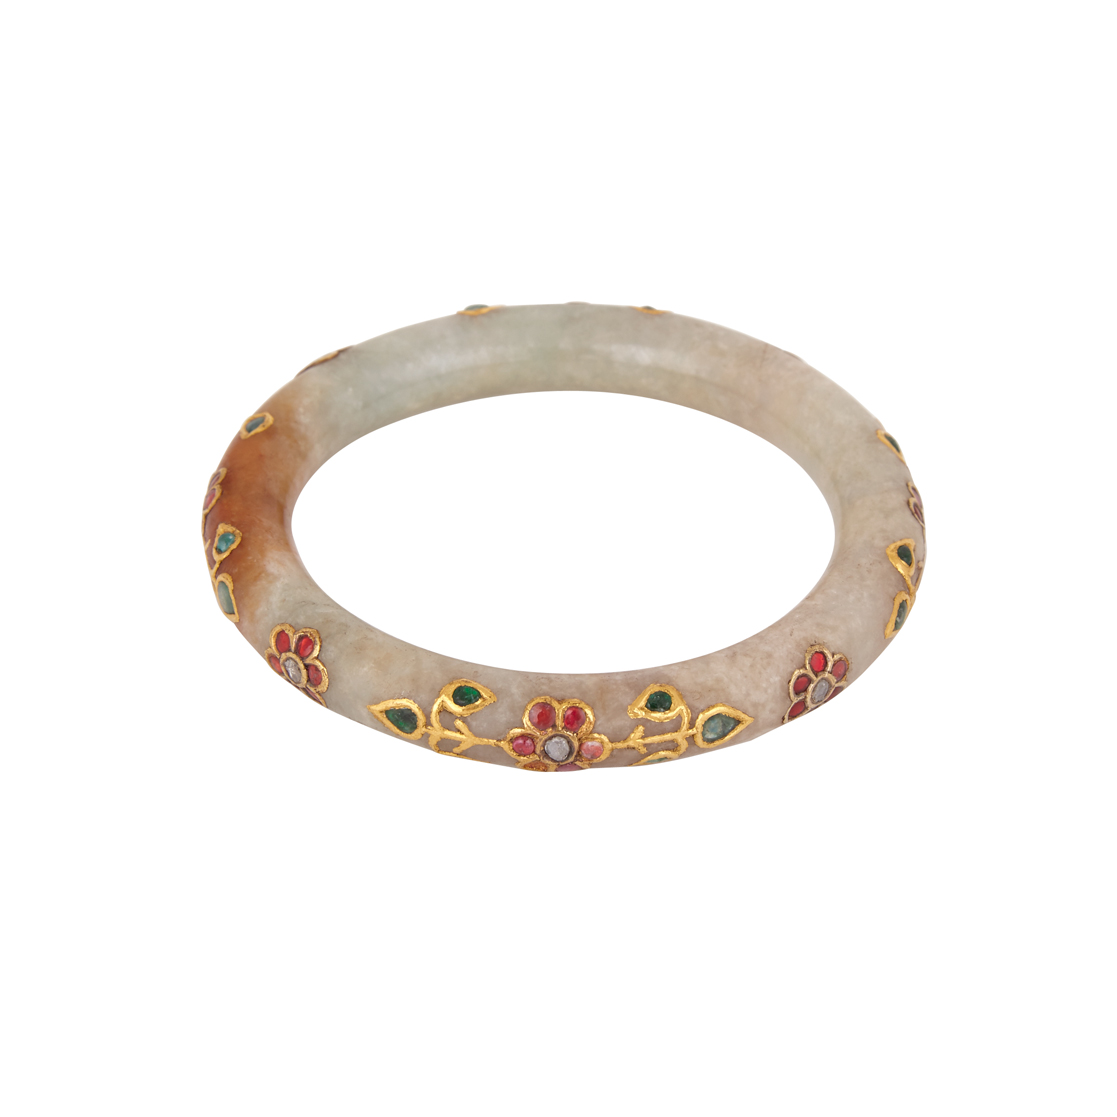 Jade (Nephrite) Bangle Inlaid with Gold, Enamel, and Stone, Mughal India, 19th Century